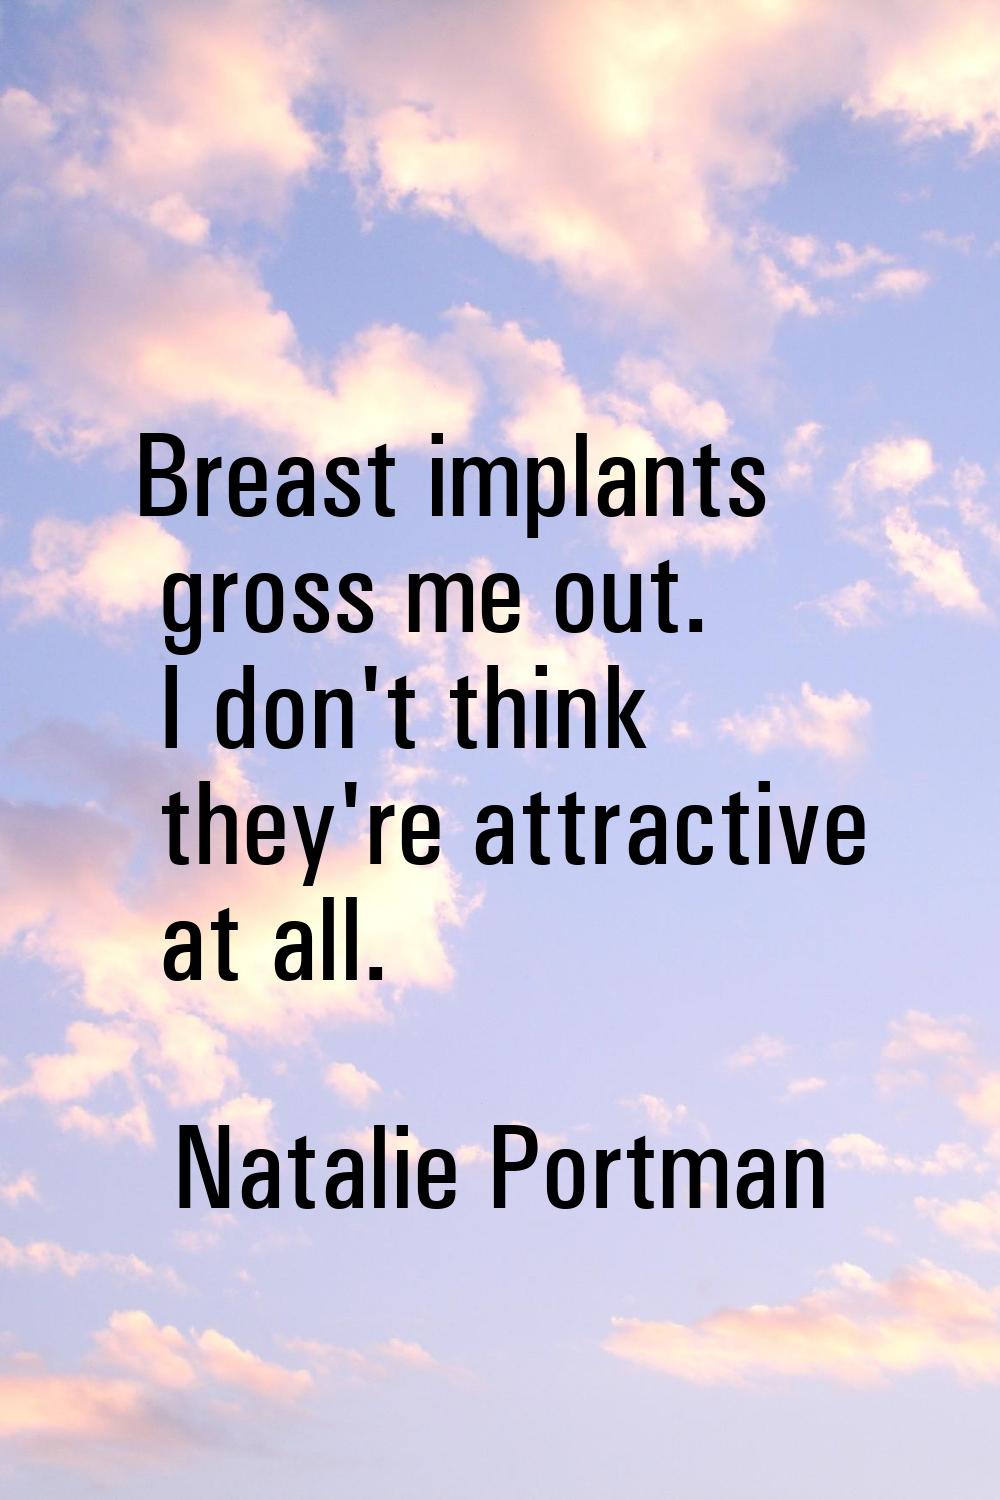 Breast implants gross me out. I don't think they're attractive at all.